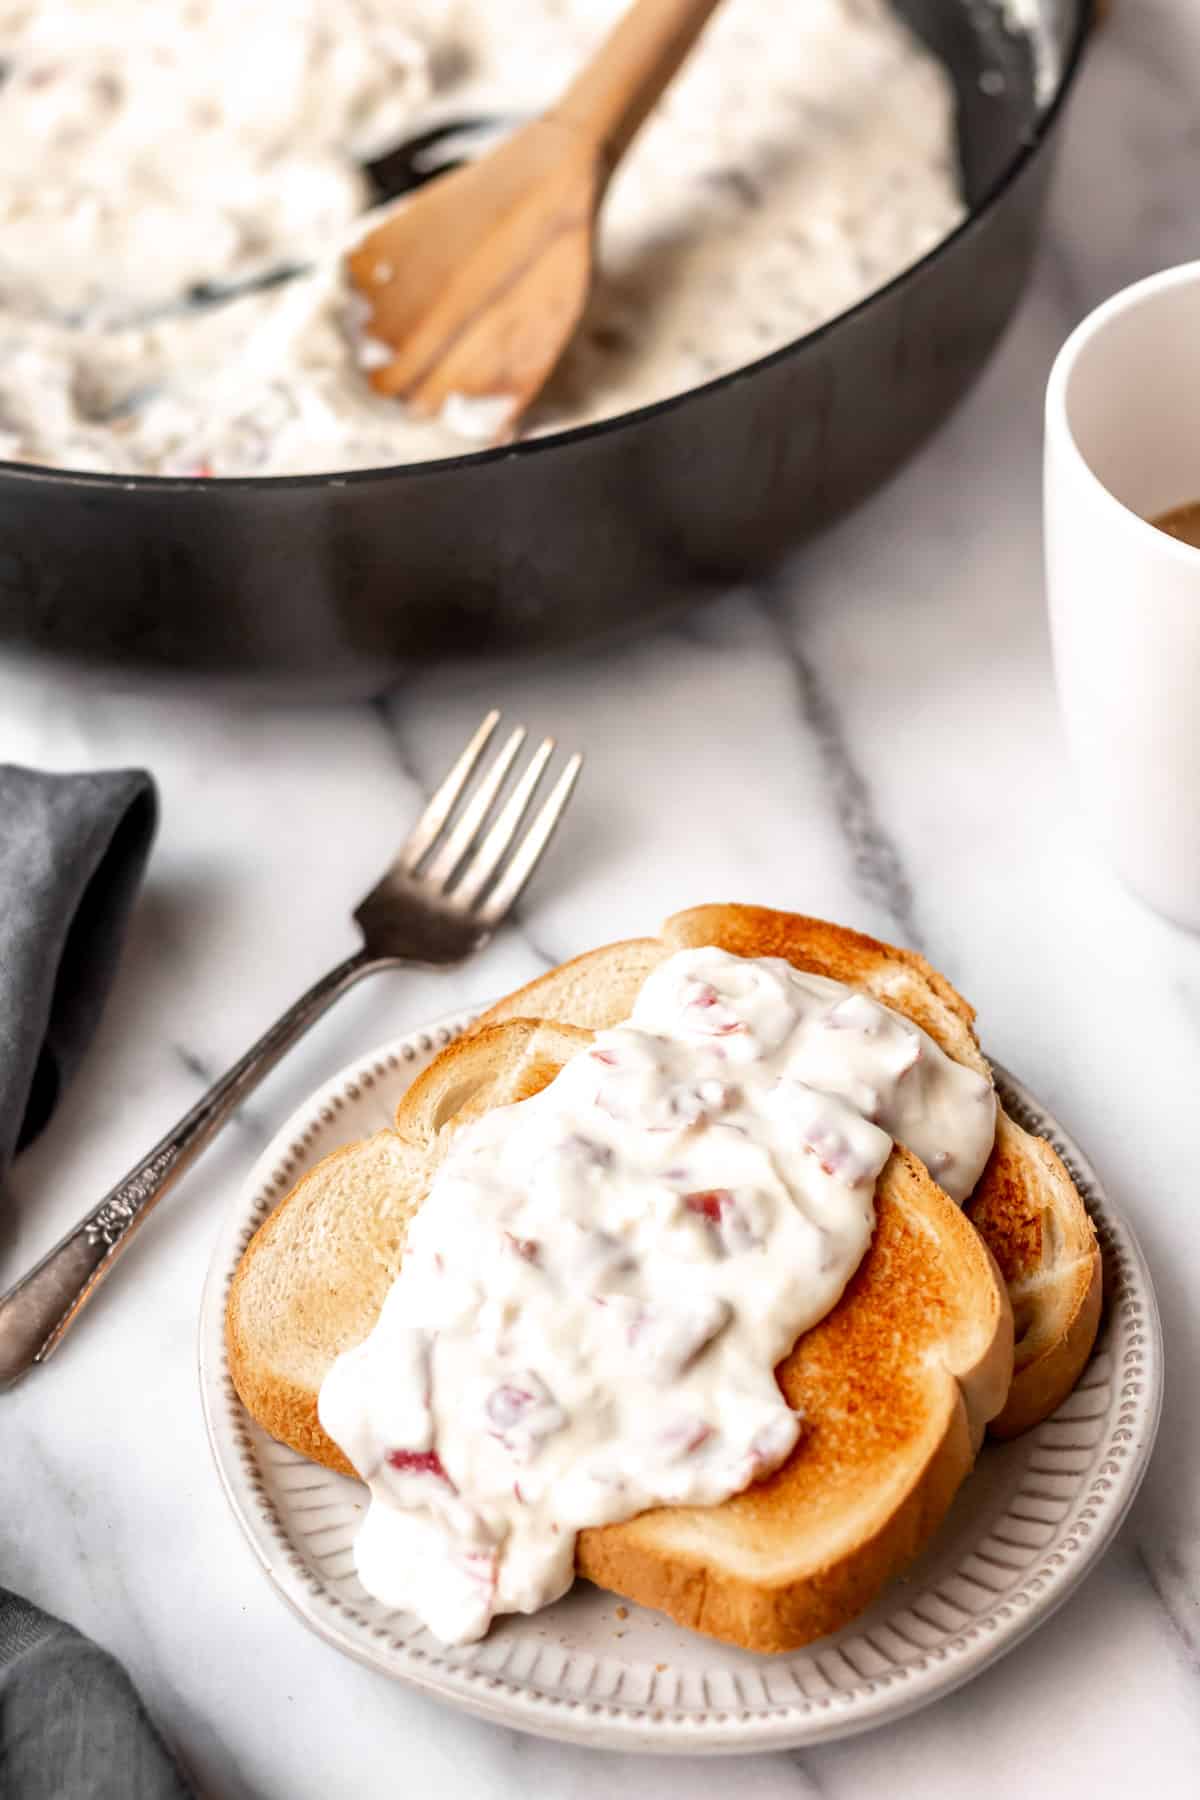 2 slices of Creamed Chipped Beef on toast on a white plate with a fork, gray towel, mug and skillet in the background all over a marble background.